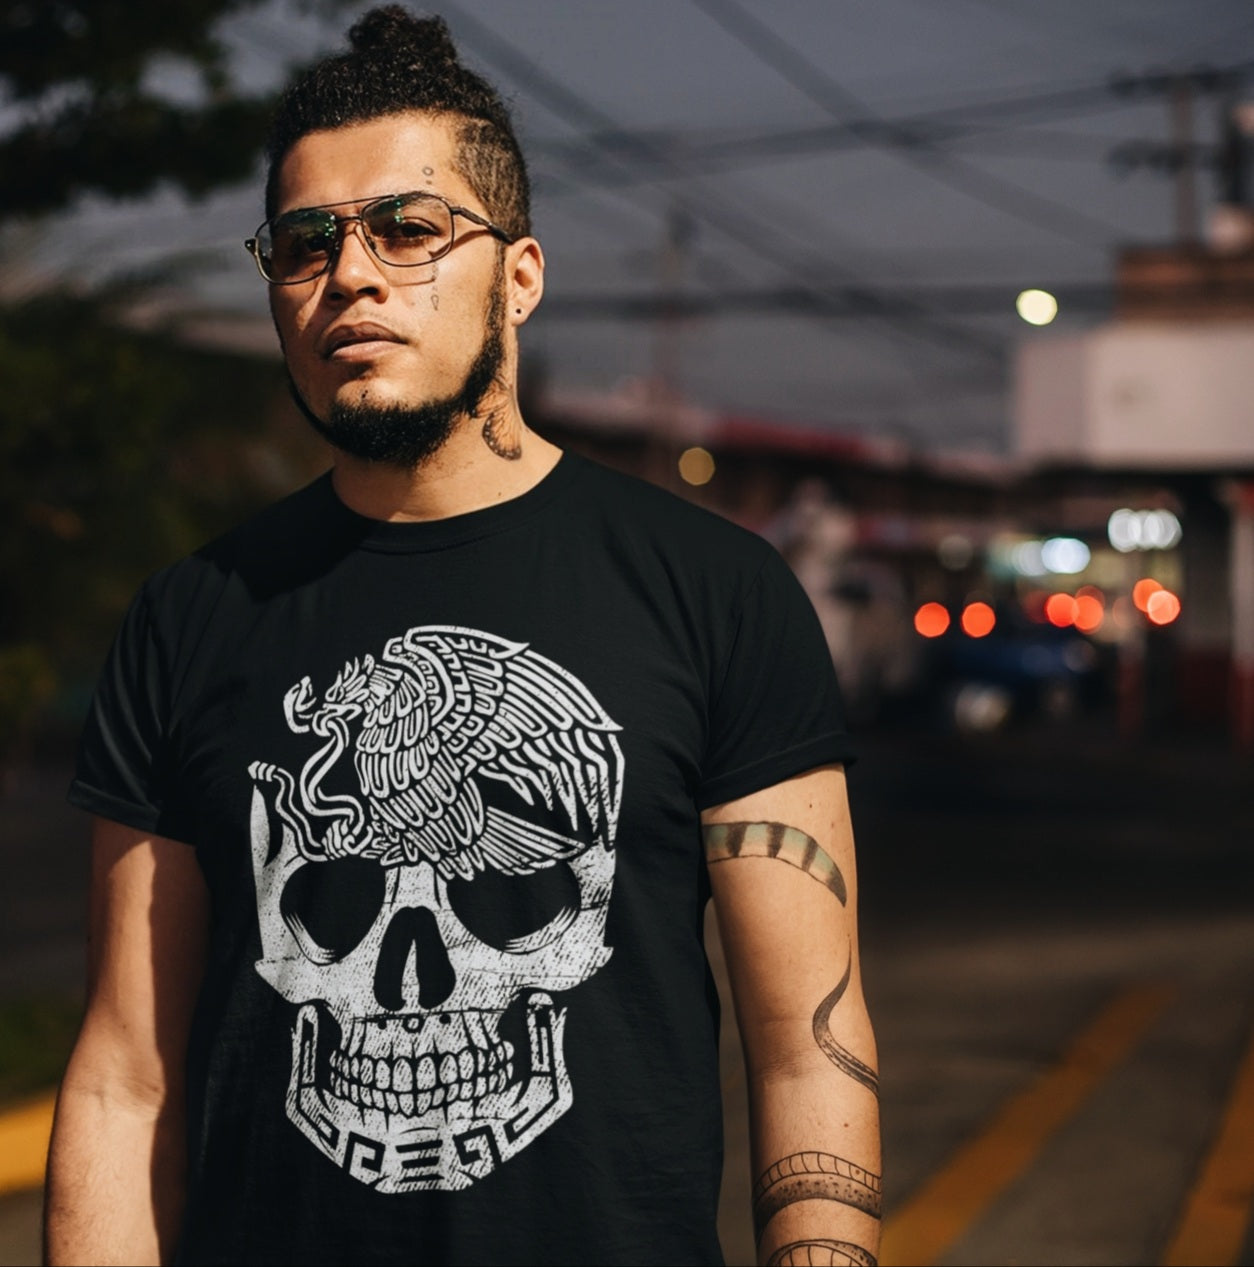 Mexican pride shirt with a skull and crested caracara design